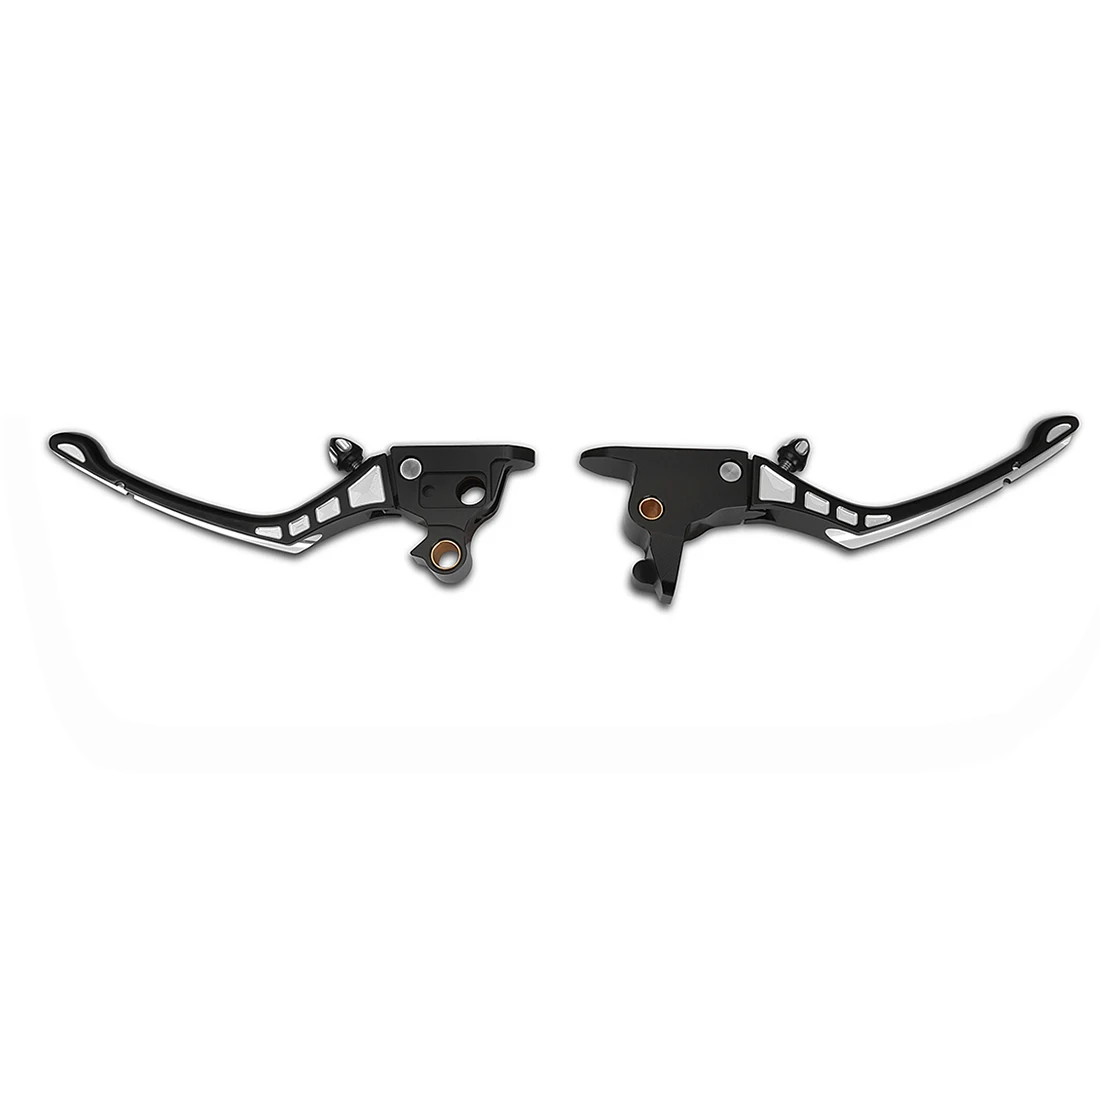 

Black CNC Clutch Brake Levers for Harley15-17 Softail Breakout Fat Boy Deluxe Heritage Classic FLS Slim 2018-2020 Low Rider FXLR